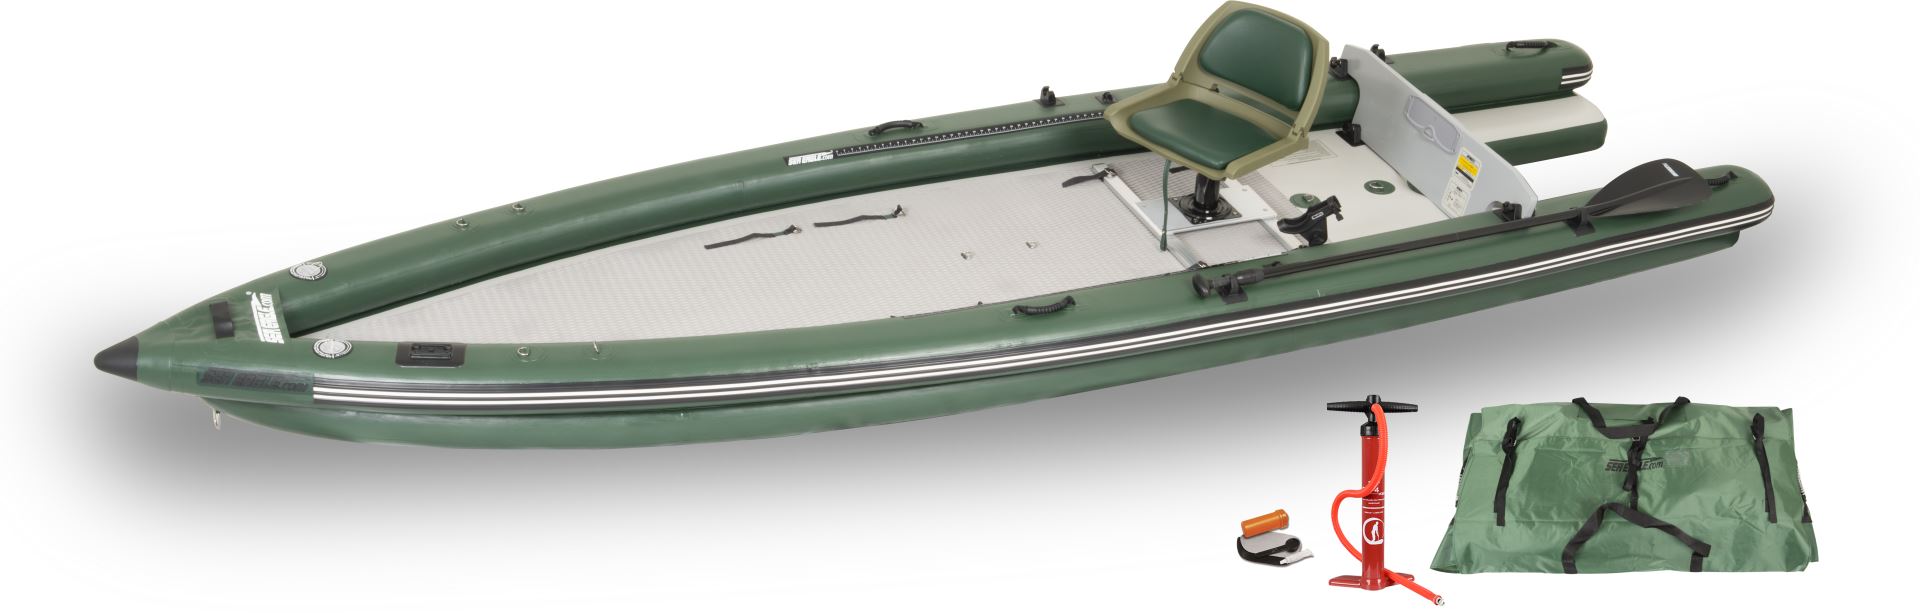 FishSkiff™ 16 Inflatable Fishing Boat 2 Person Swivel Seat Package by SeaEagle FSK16K_SW SeaEagle